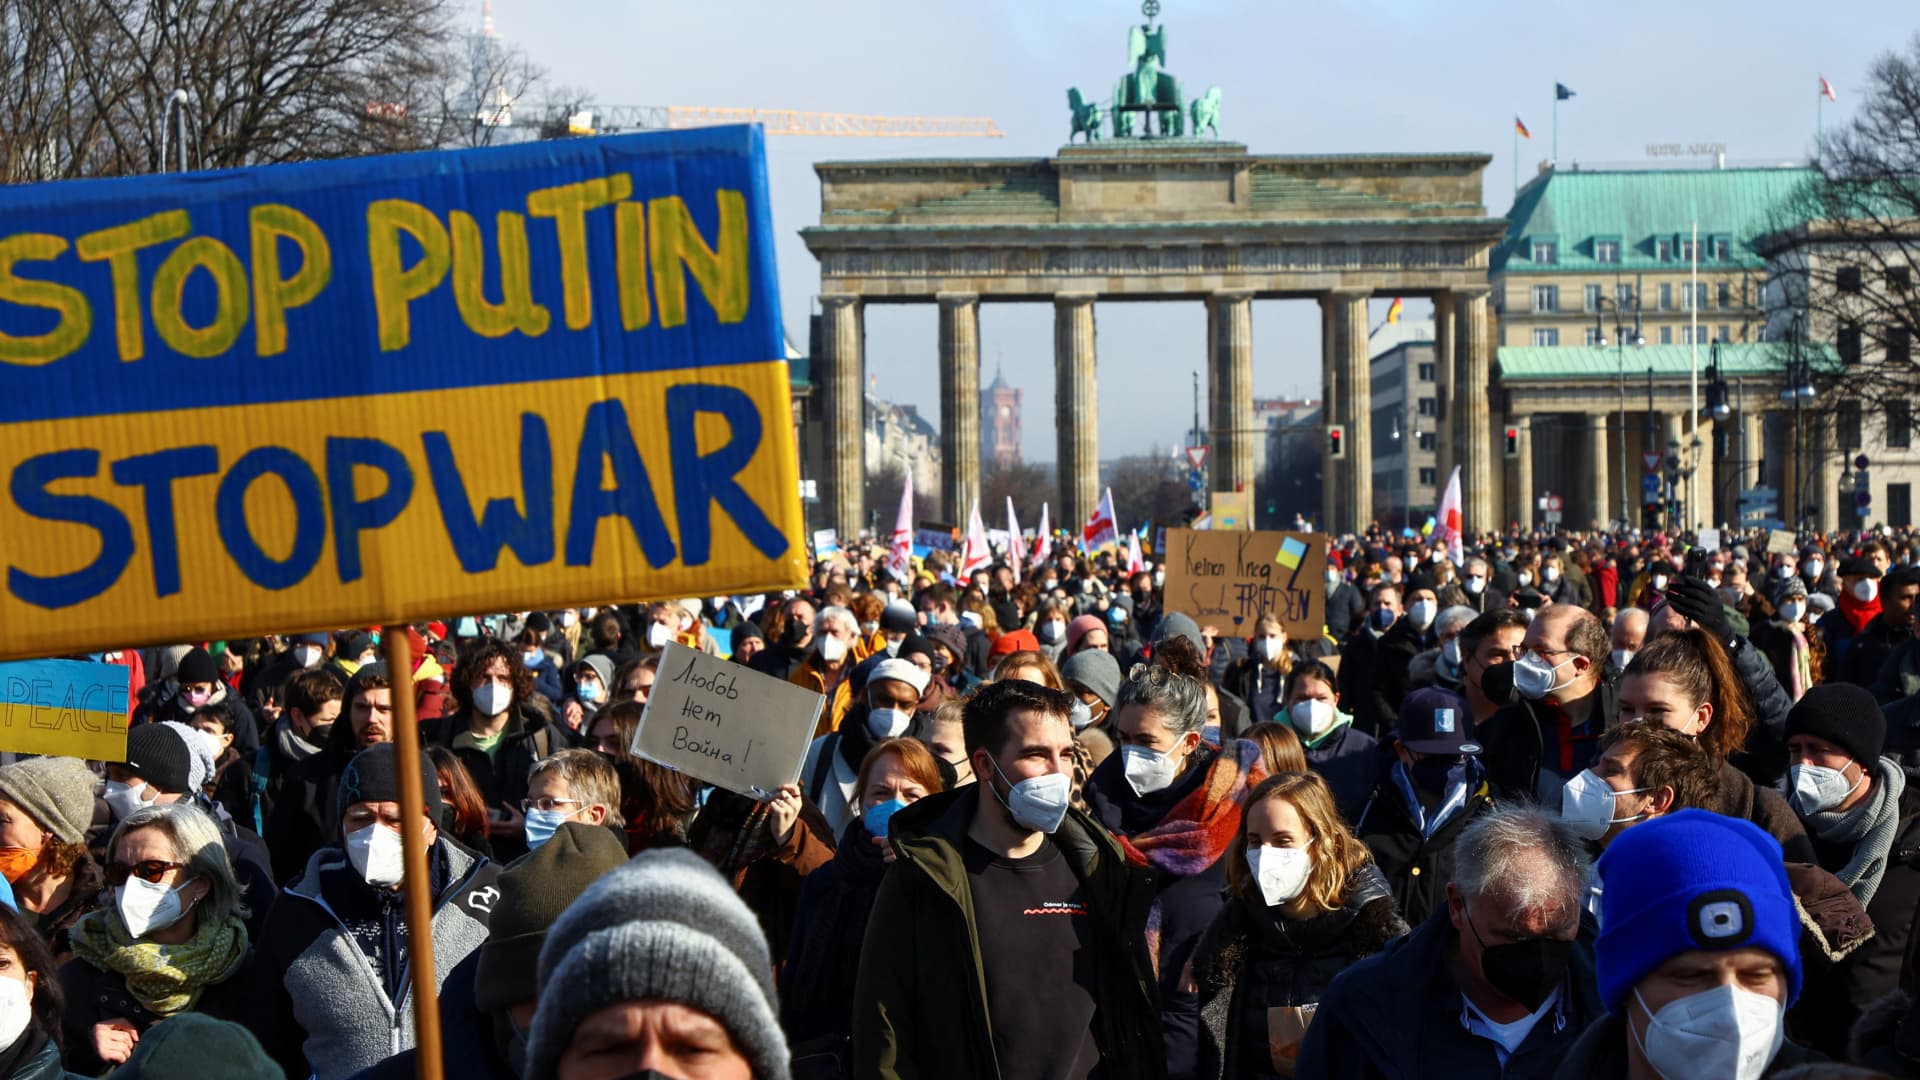 Demonstrators march during an anti-war protest, after Russia launched a massive military operation against Ukraine, outside the Brandenburg Gate in Berlin, Germany, February 27, 2022.